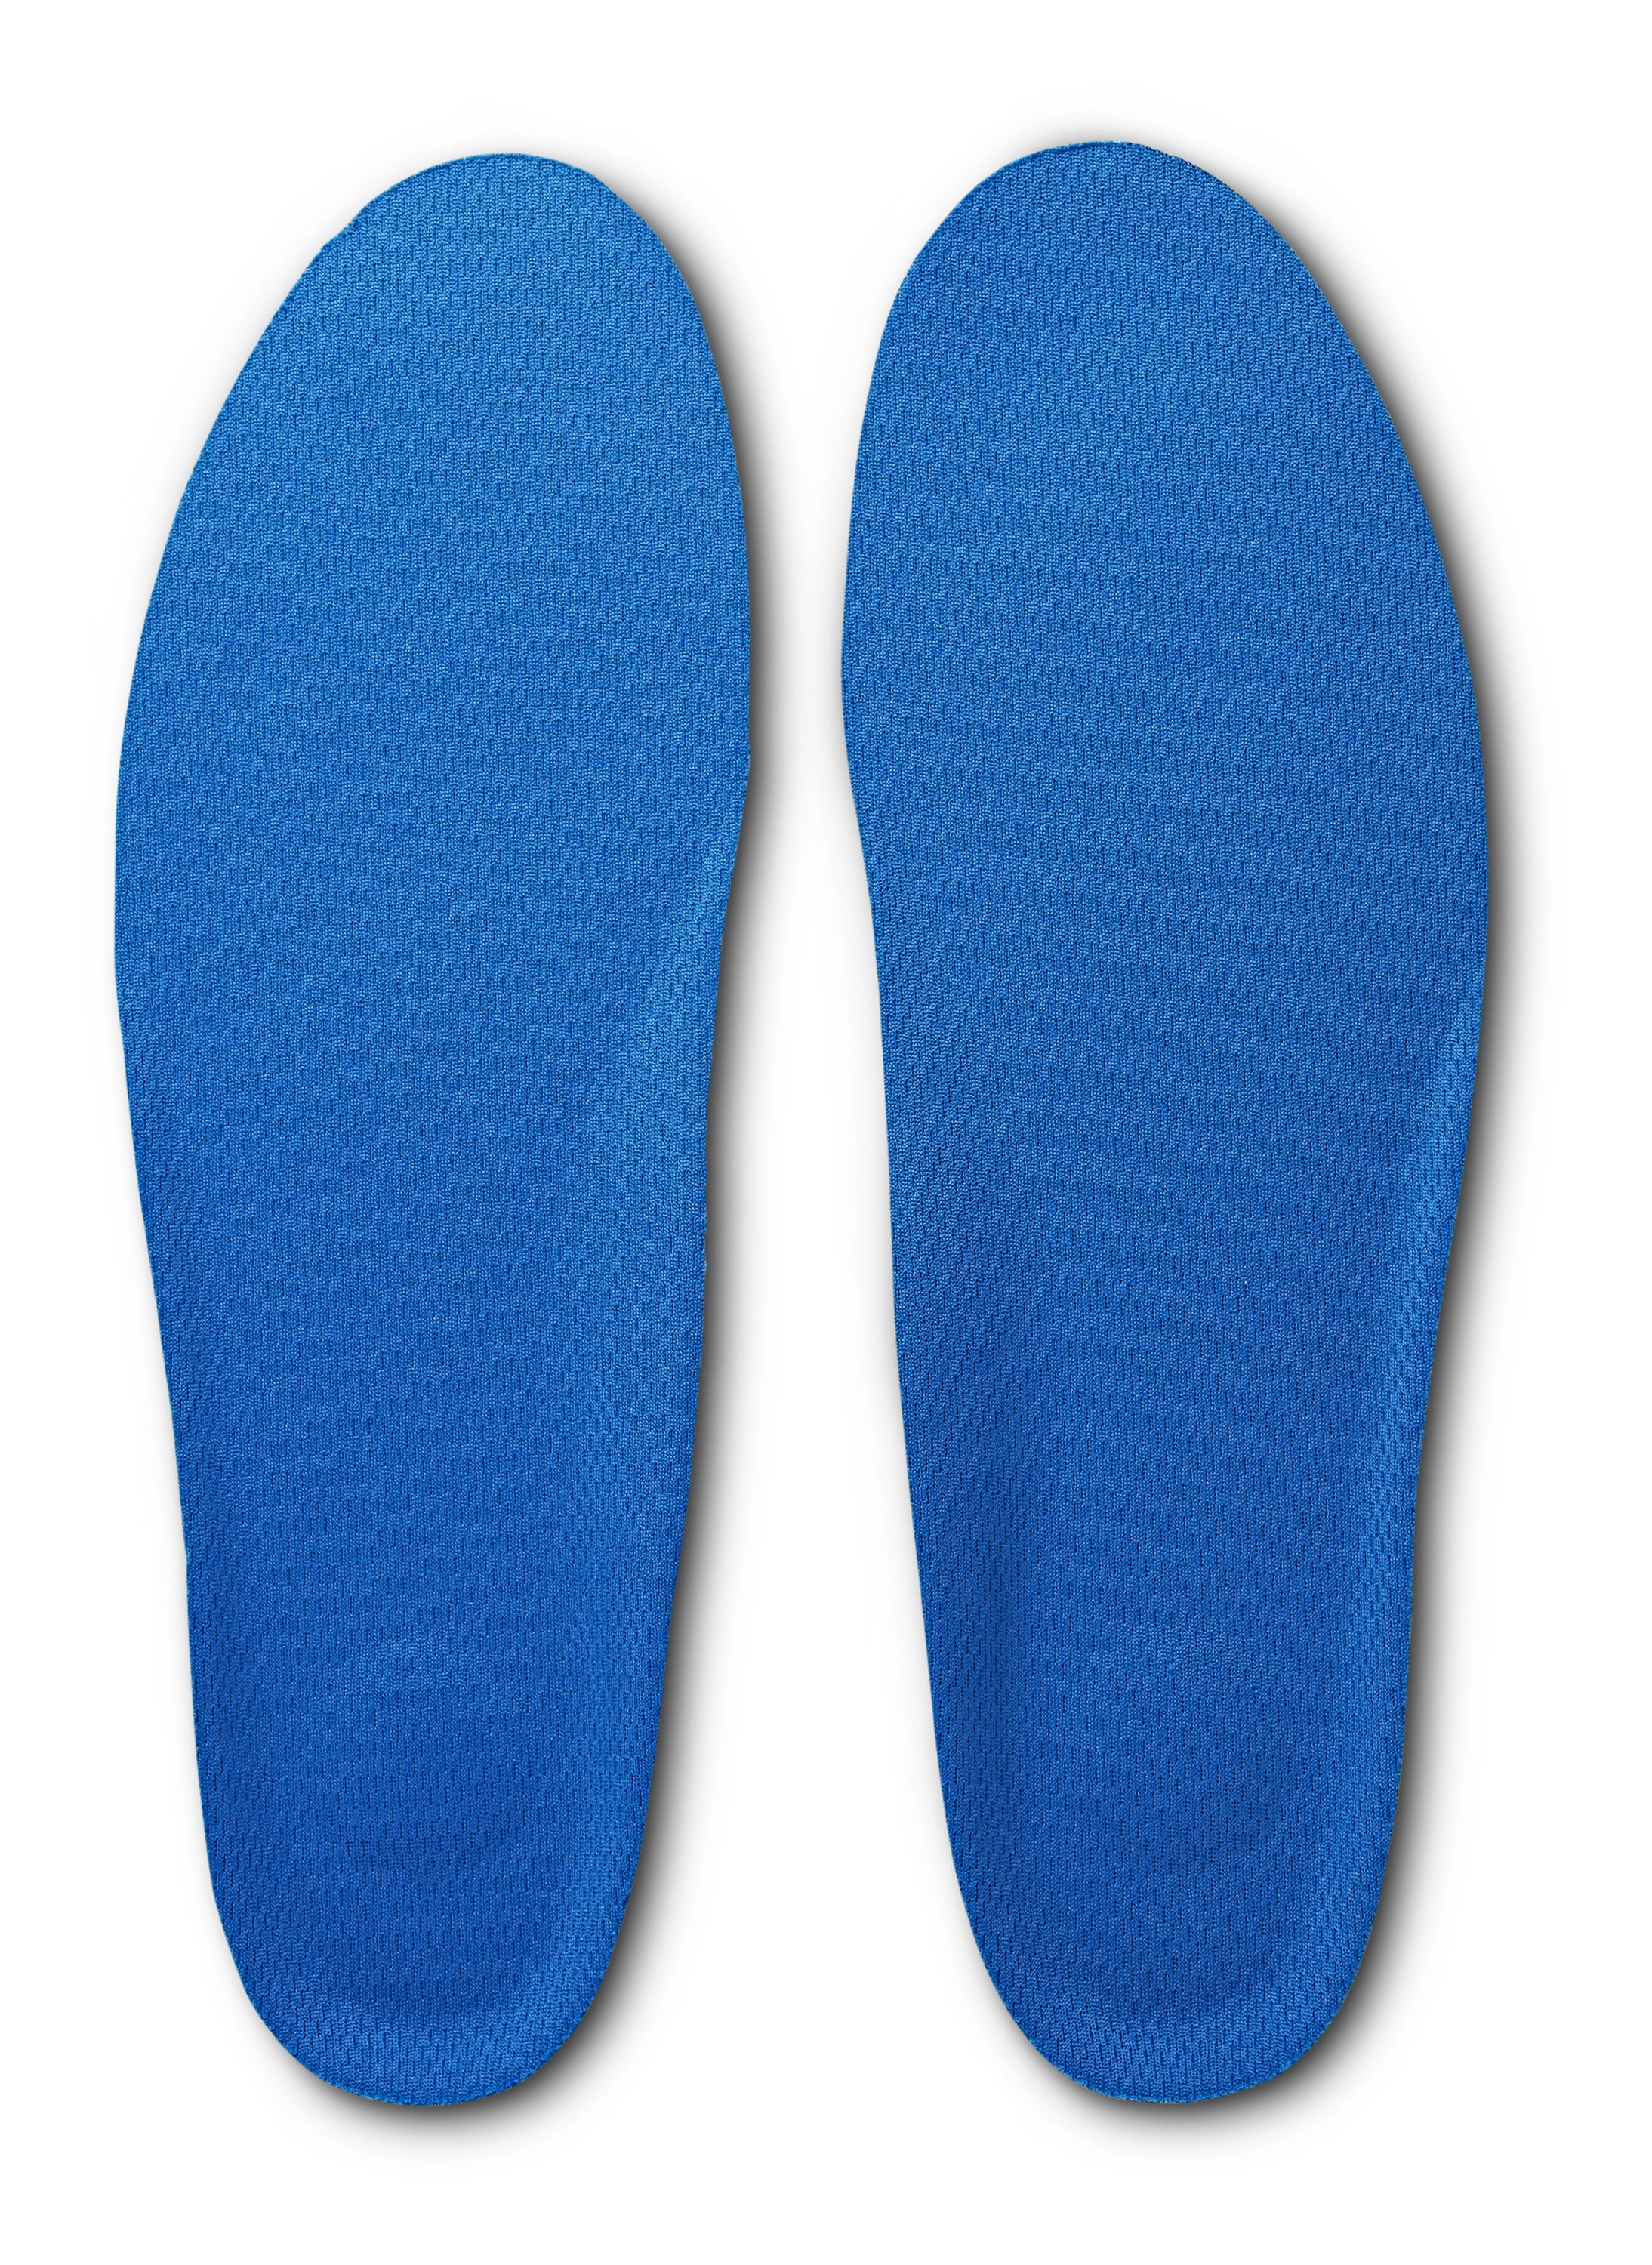 SOFCOMFORT Sport Insole One Size Fits 